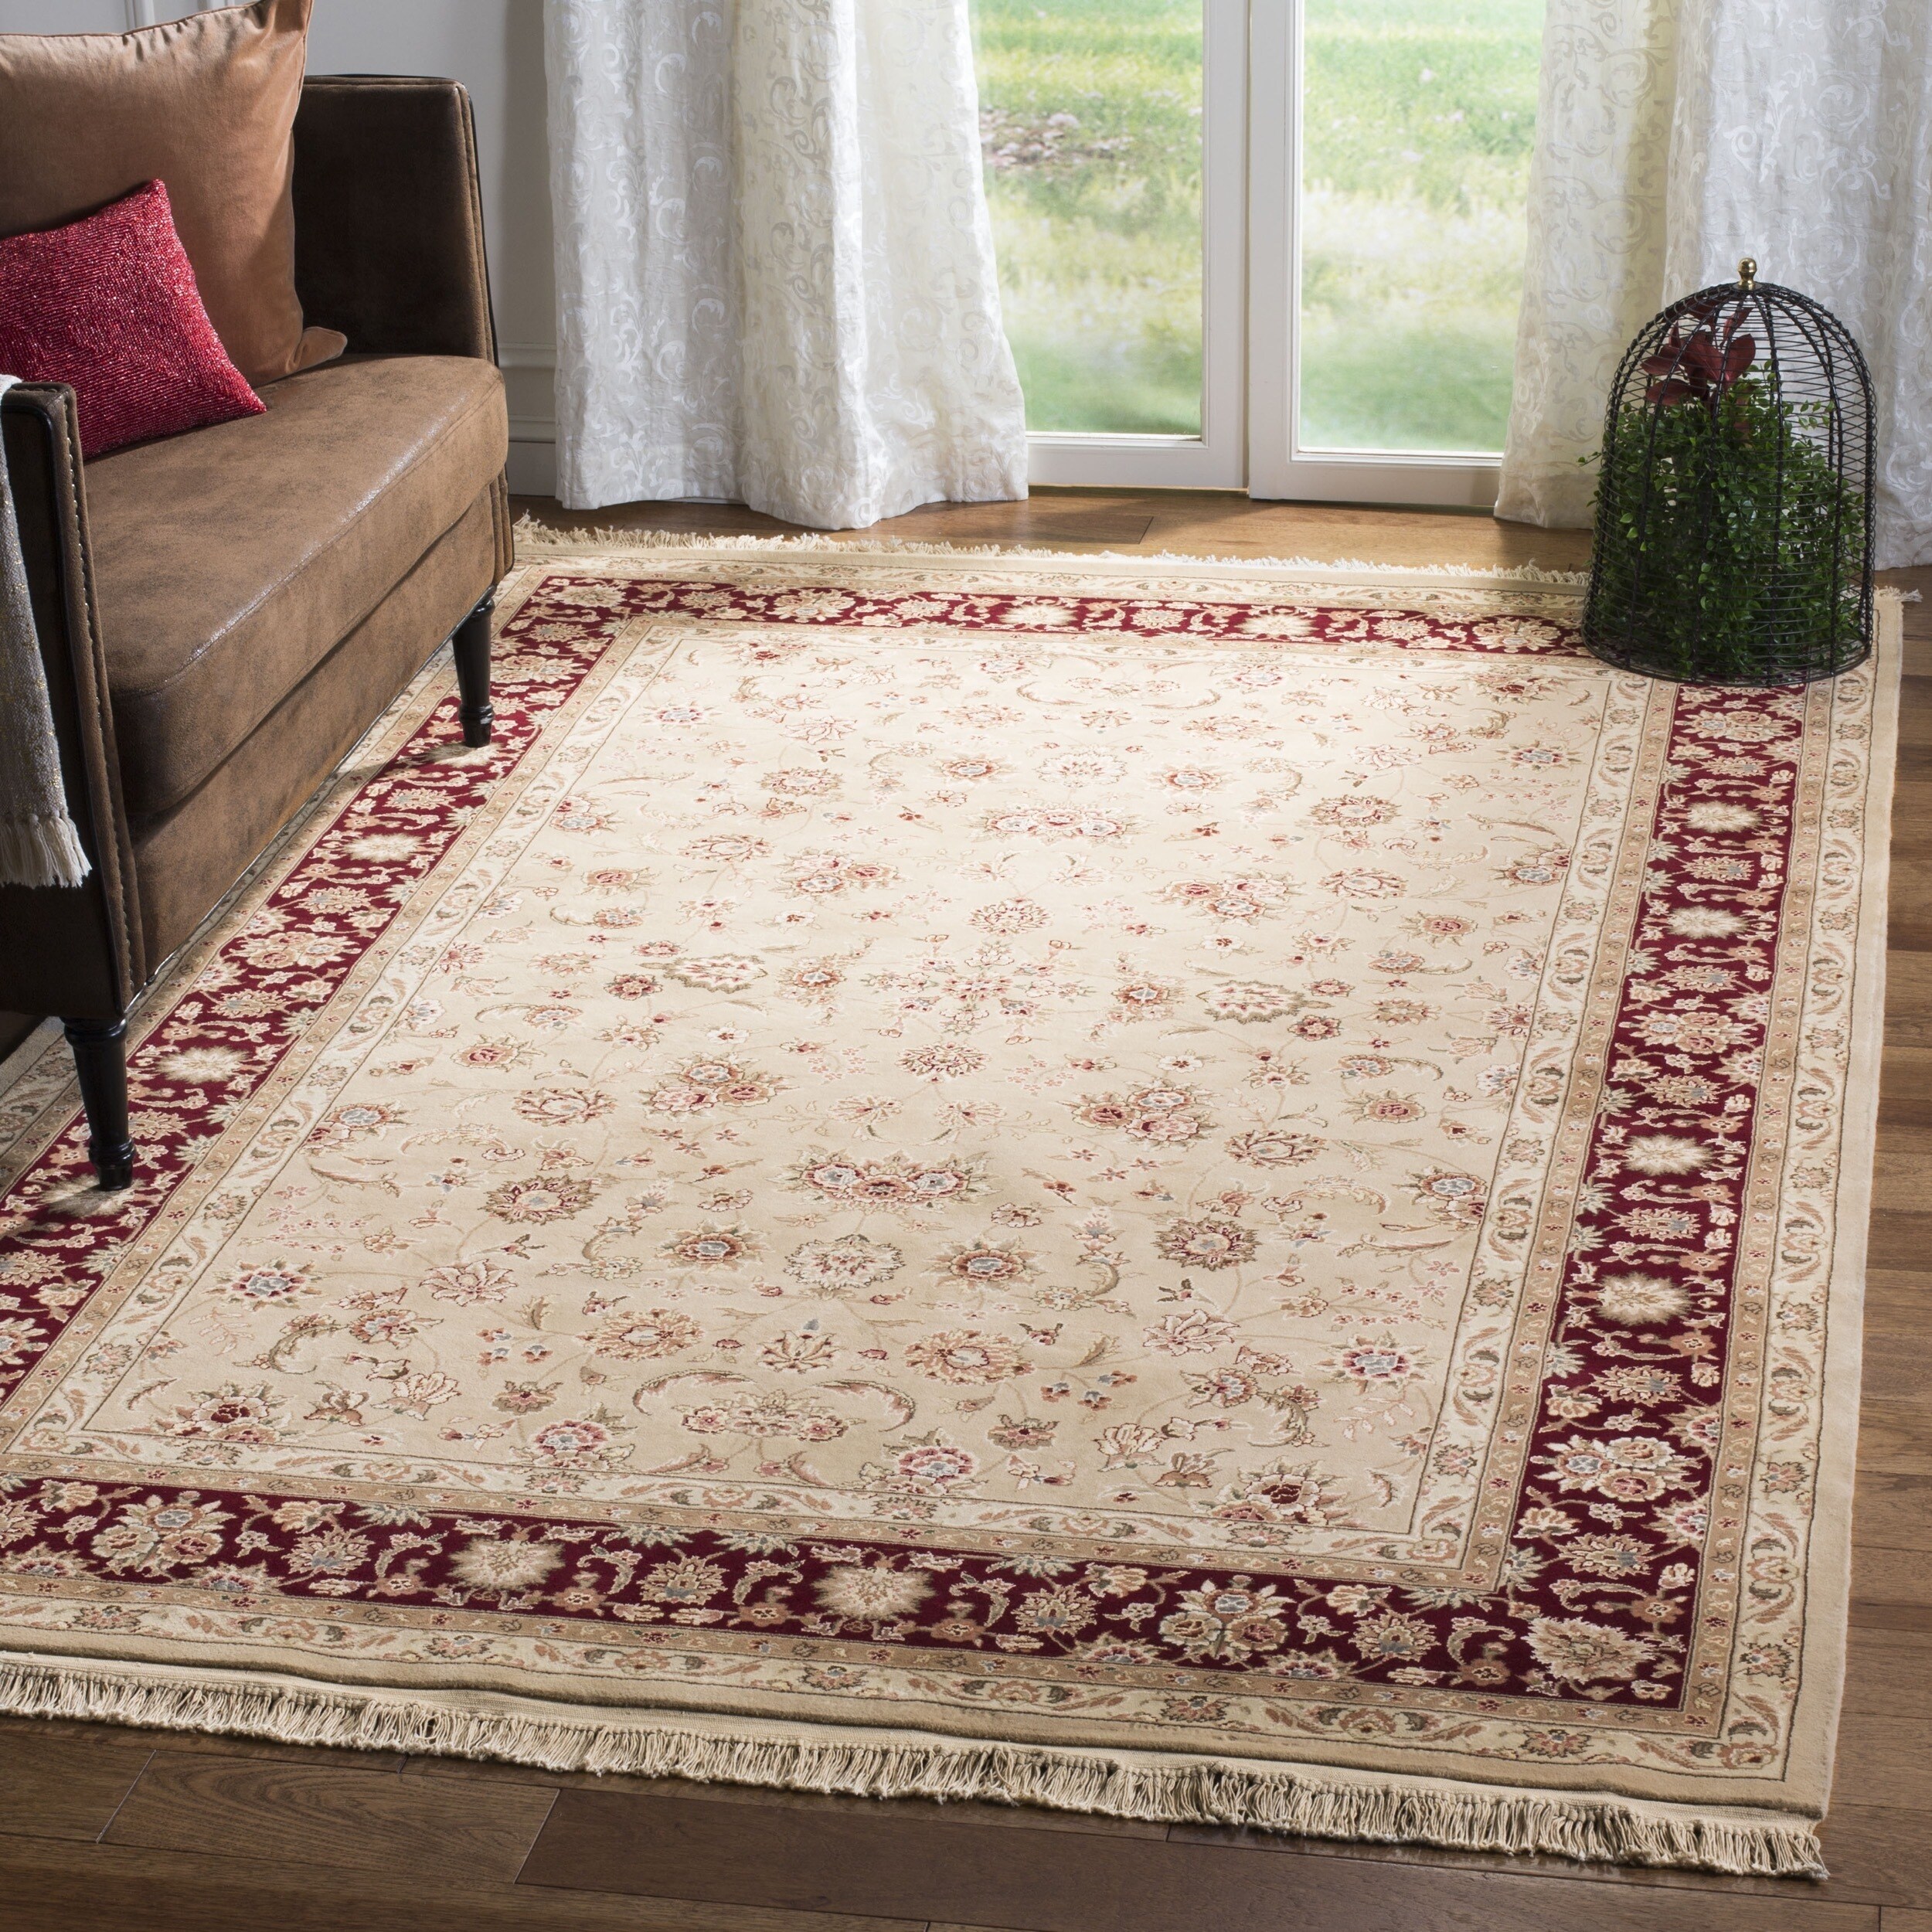 Safavieh Hand knotted Tabriz Floral Tan/ Red Wool/ Silk Rug (9 X 12)